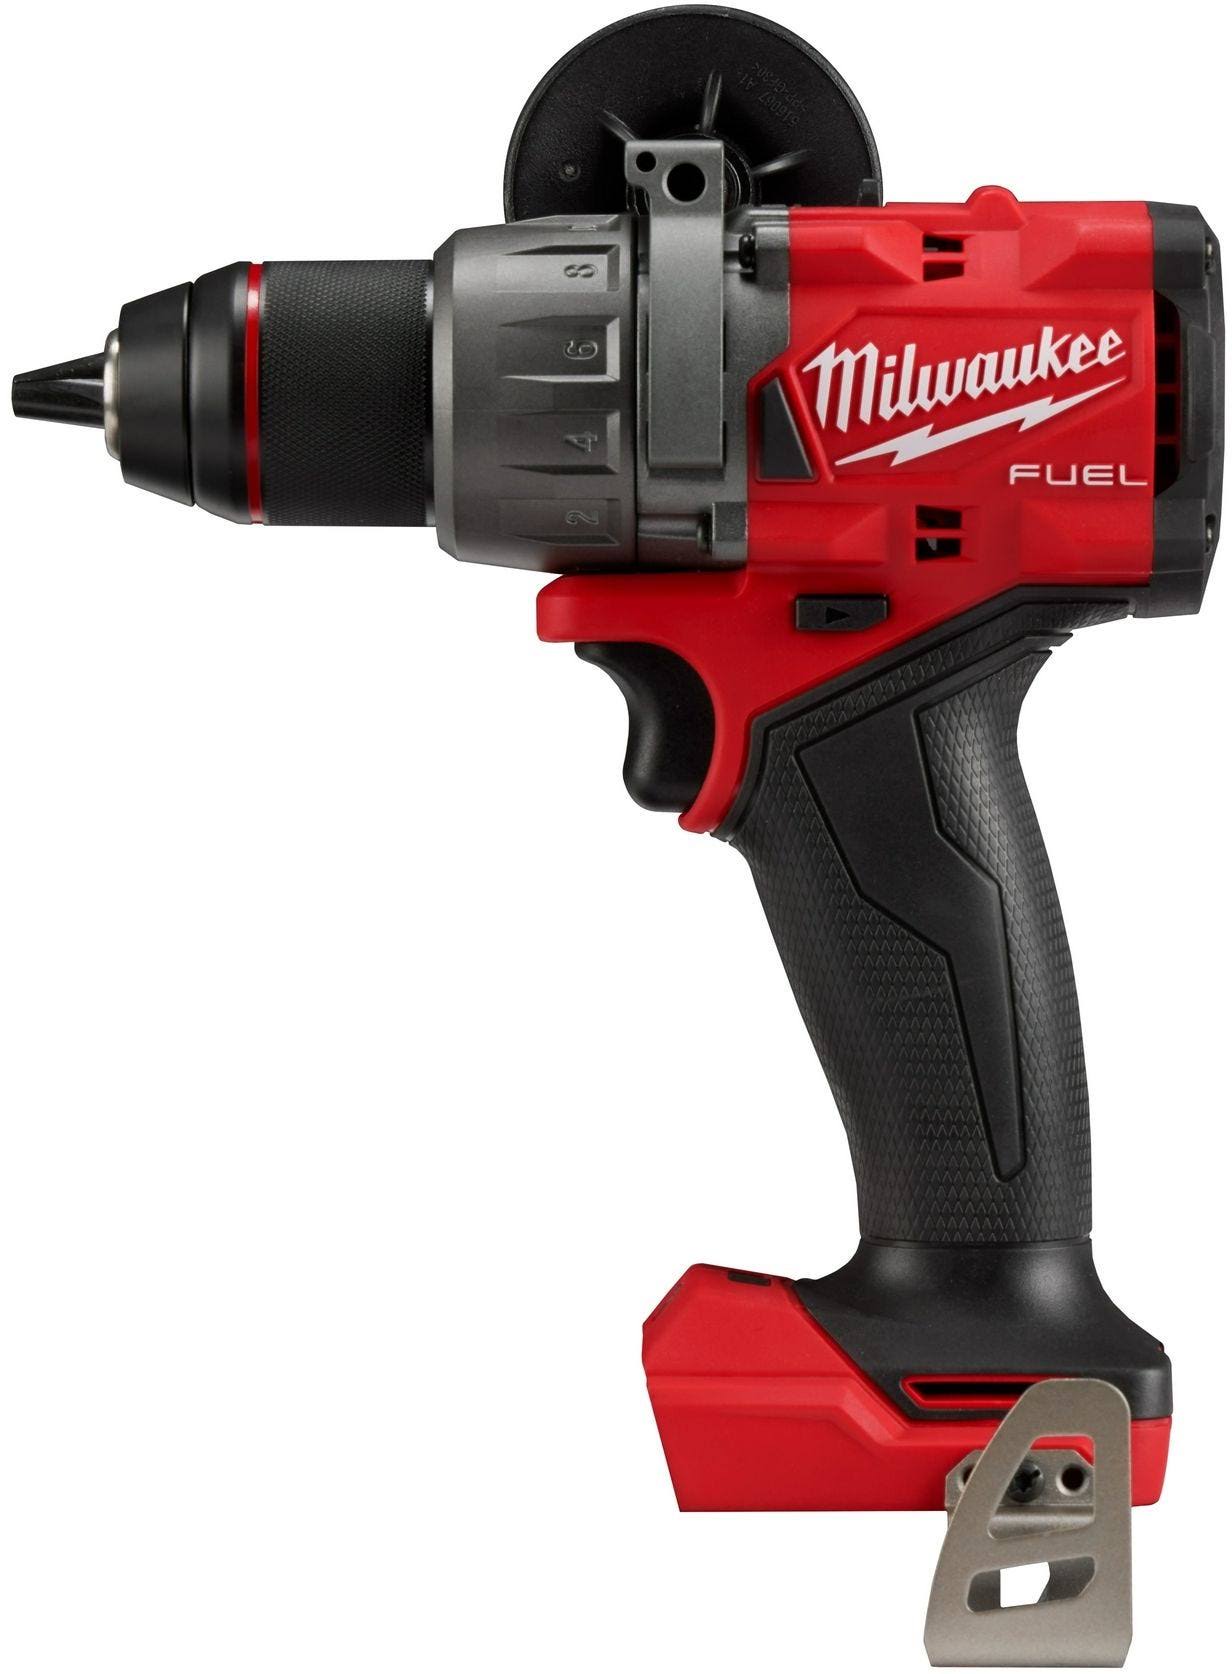 Milwaukee 2903-20 M18 Fuel 1/2" Drill/Driver, Tool Only